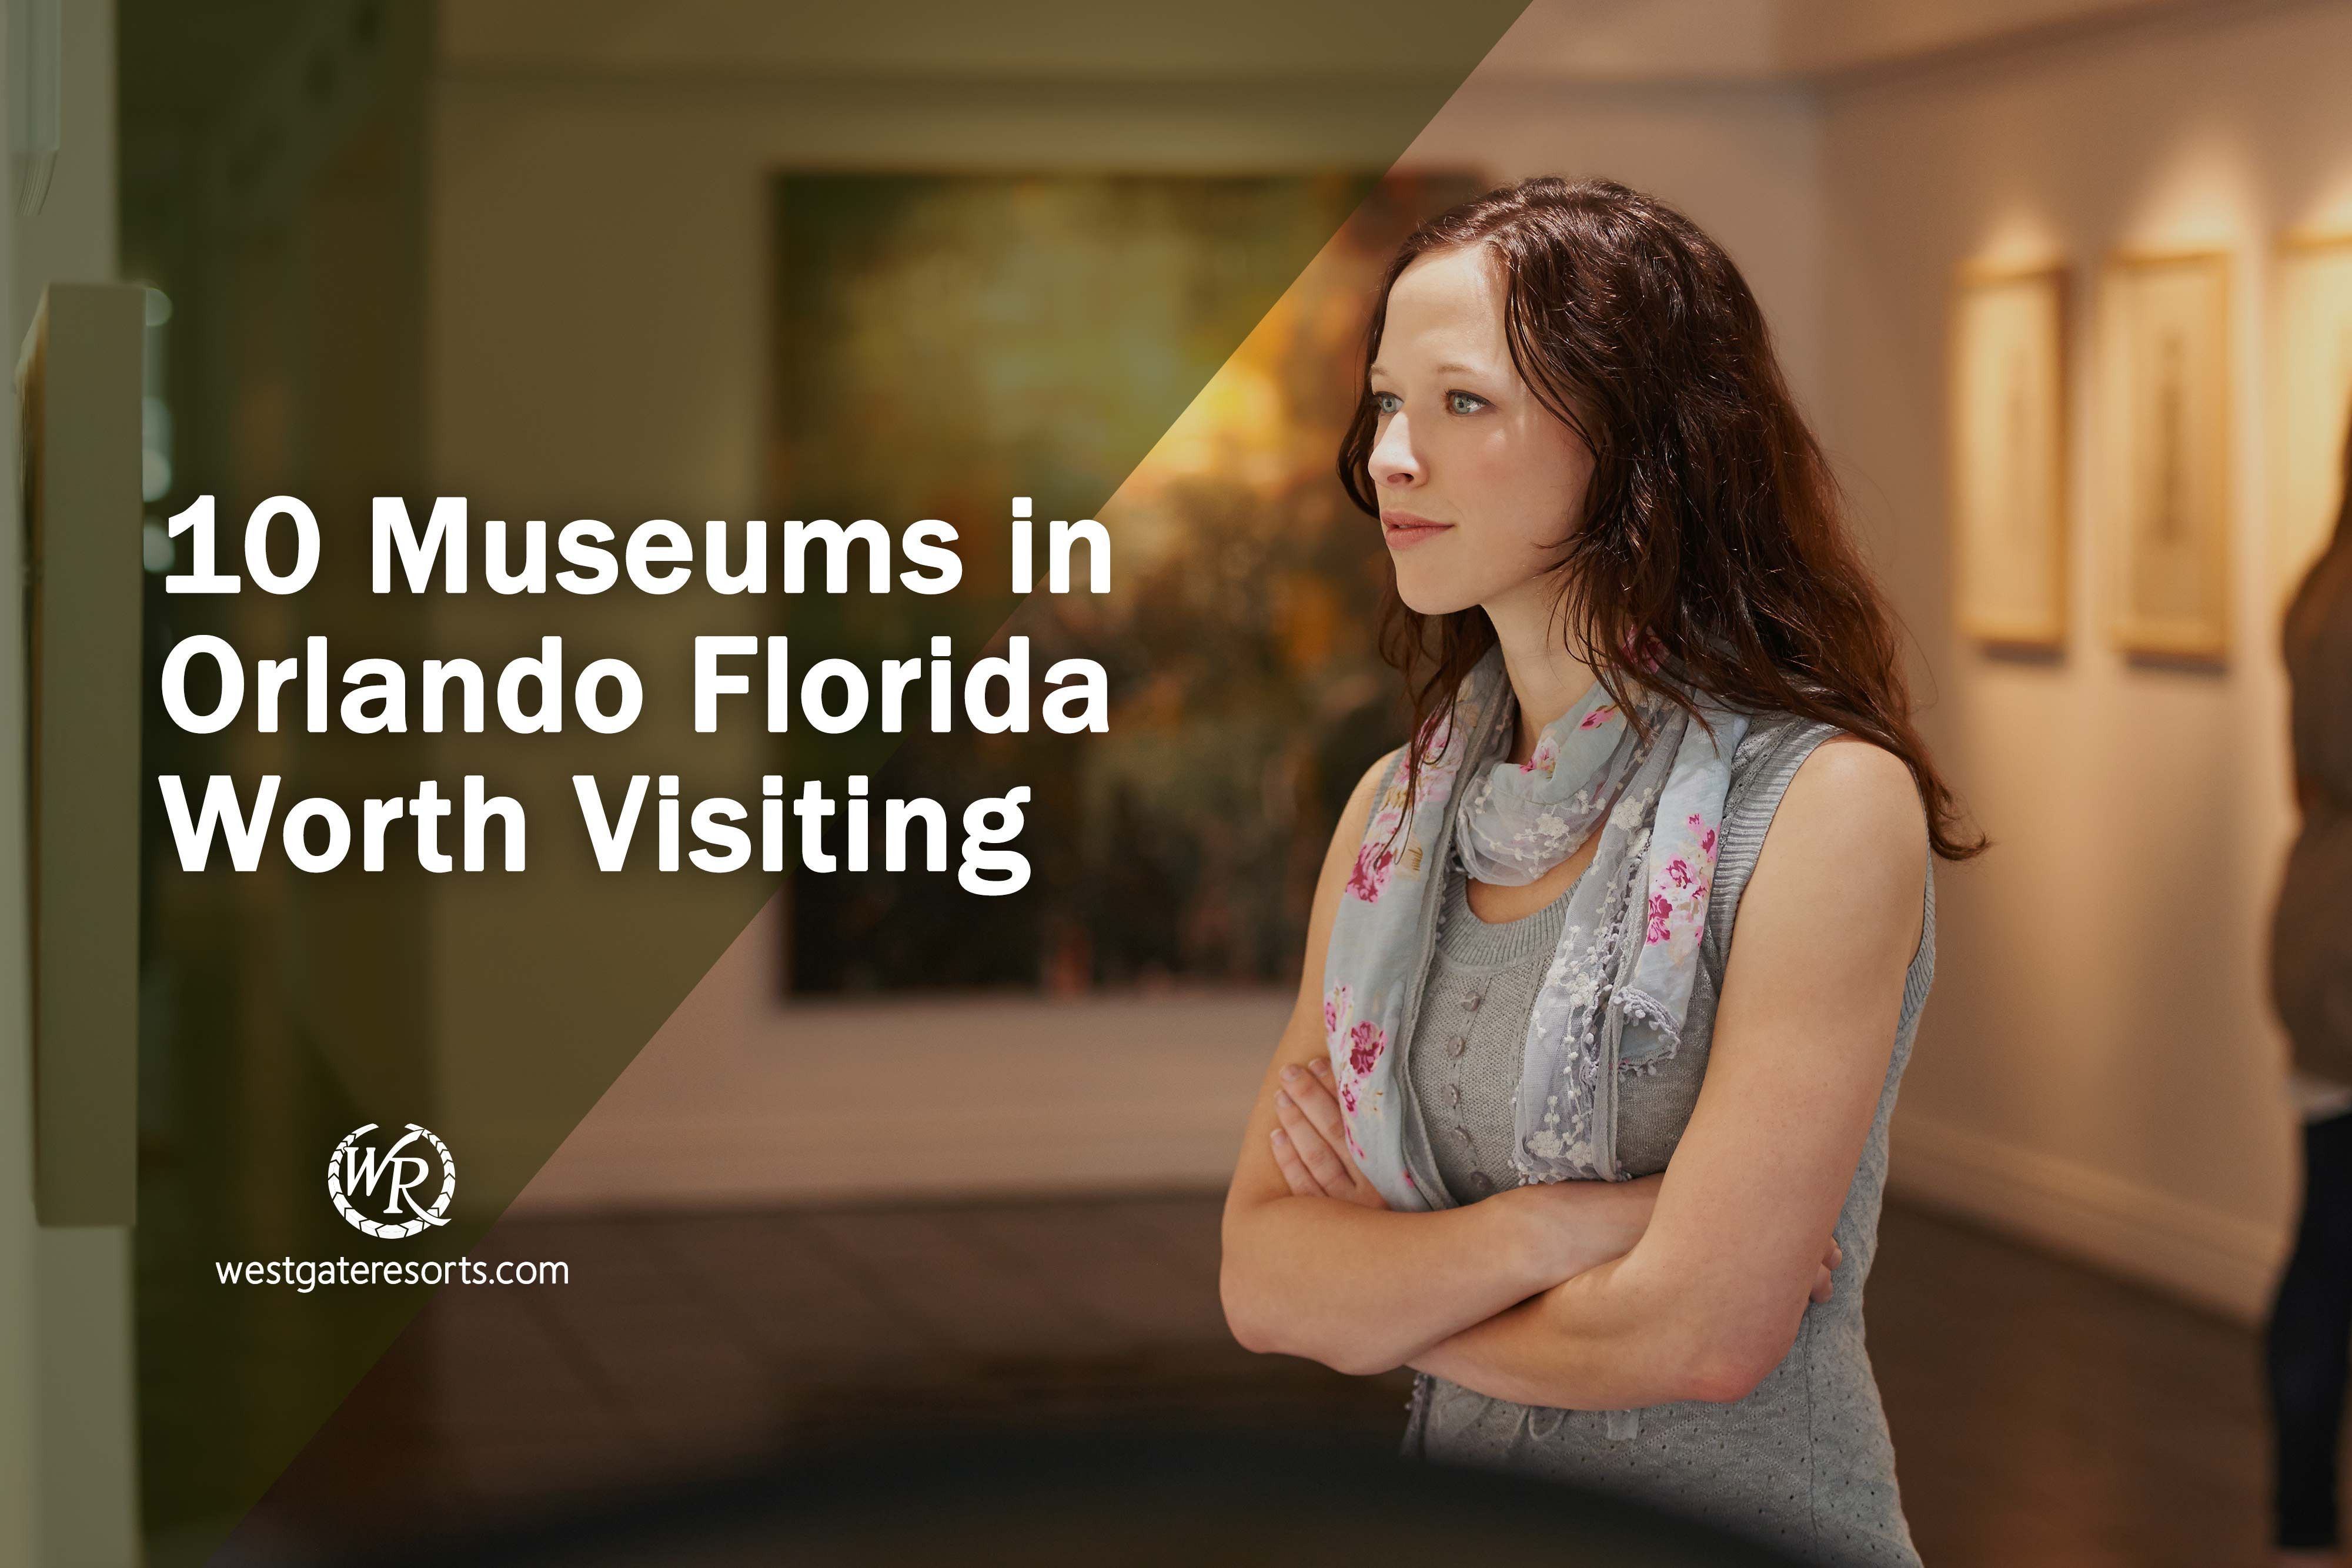 10 Museums in Orlando Florida Worth Visiting - Orlando Museums - Art Galleries